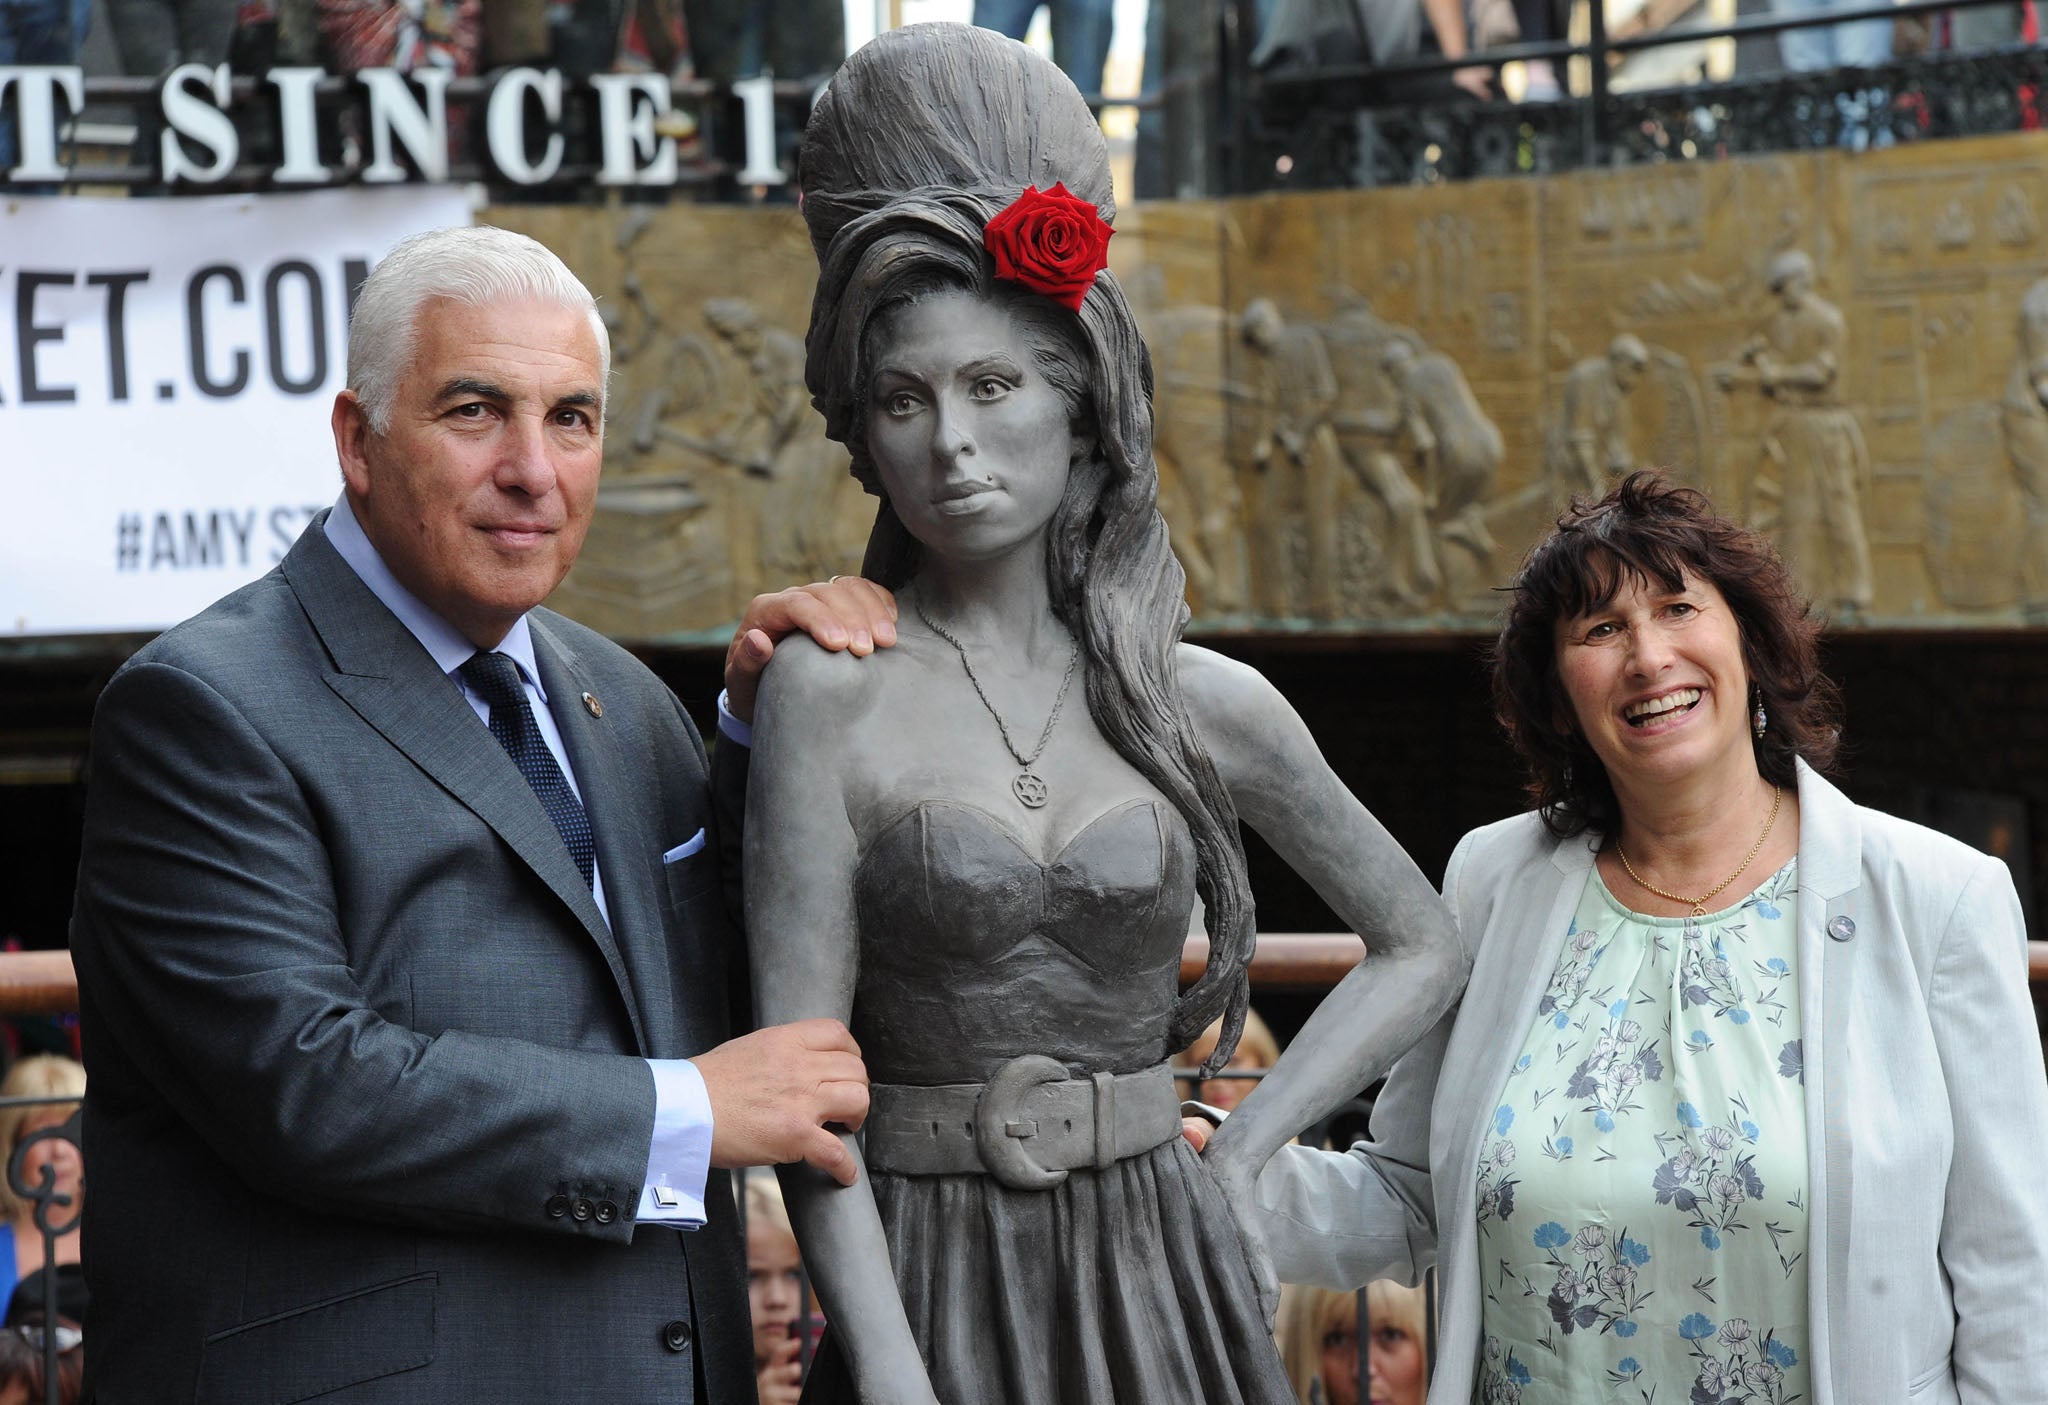 Amy Winehouse's father, Mitch Winehouse, led the unveiling ceremony of her statue just outside the Stables Market